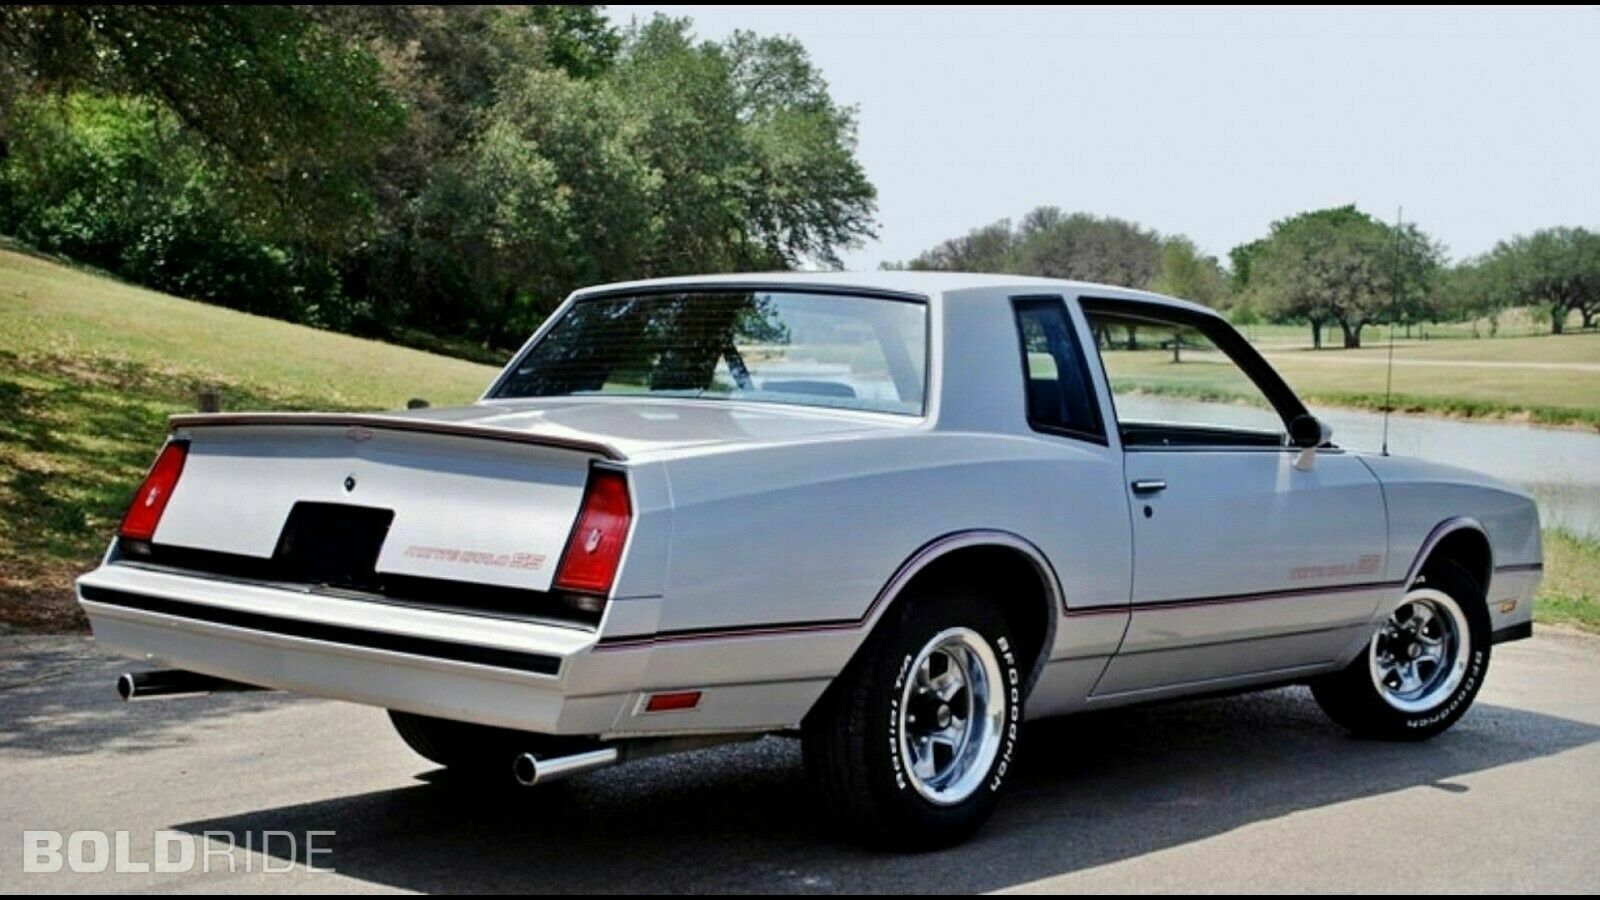 1985 CHEVY MONTE CARLO SS (grey) POSTER 24 X 36 INCH - £17.39 GBP